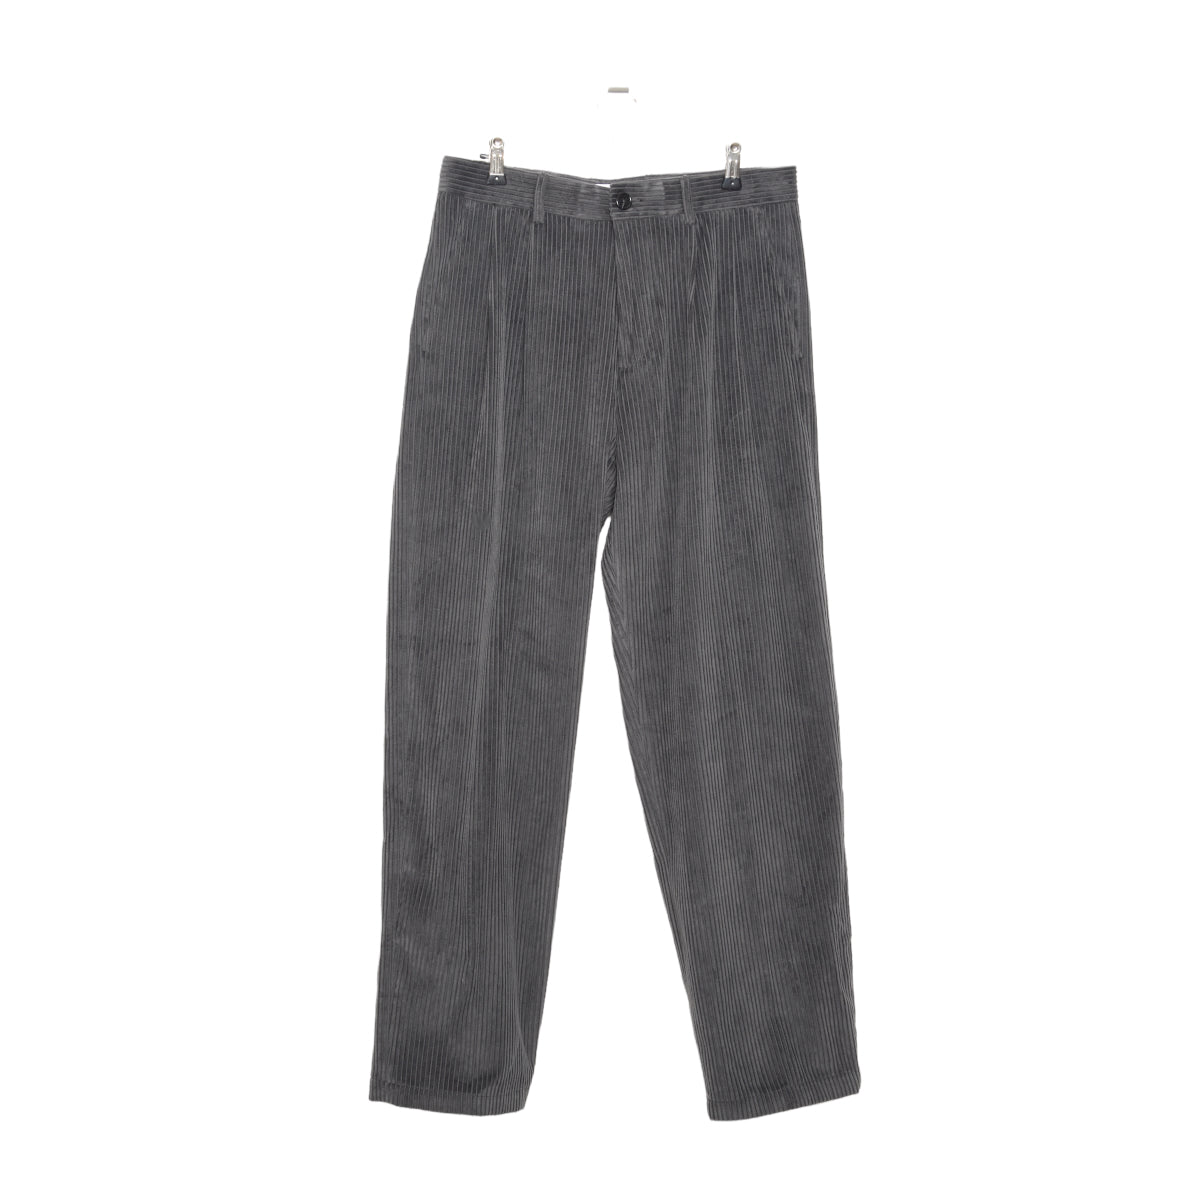 Hope Space Trousers grey cord